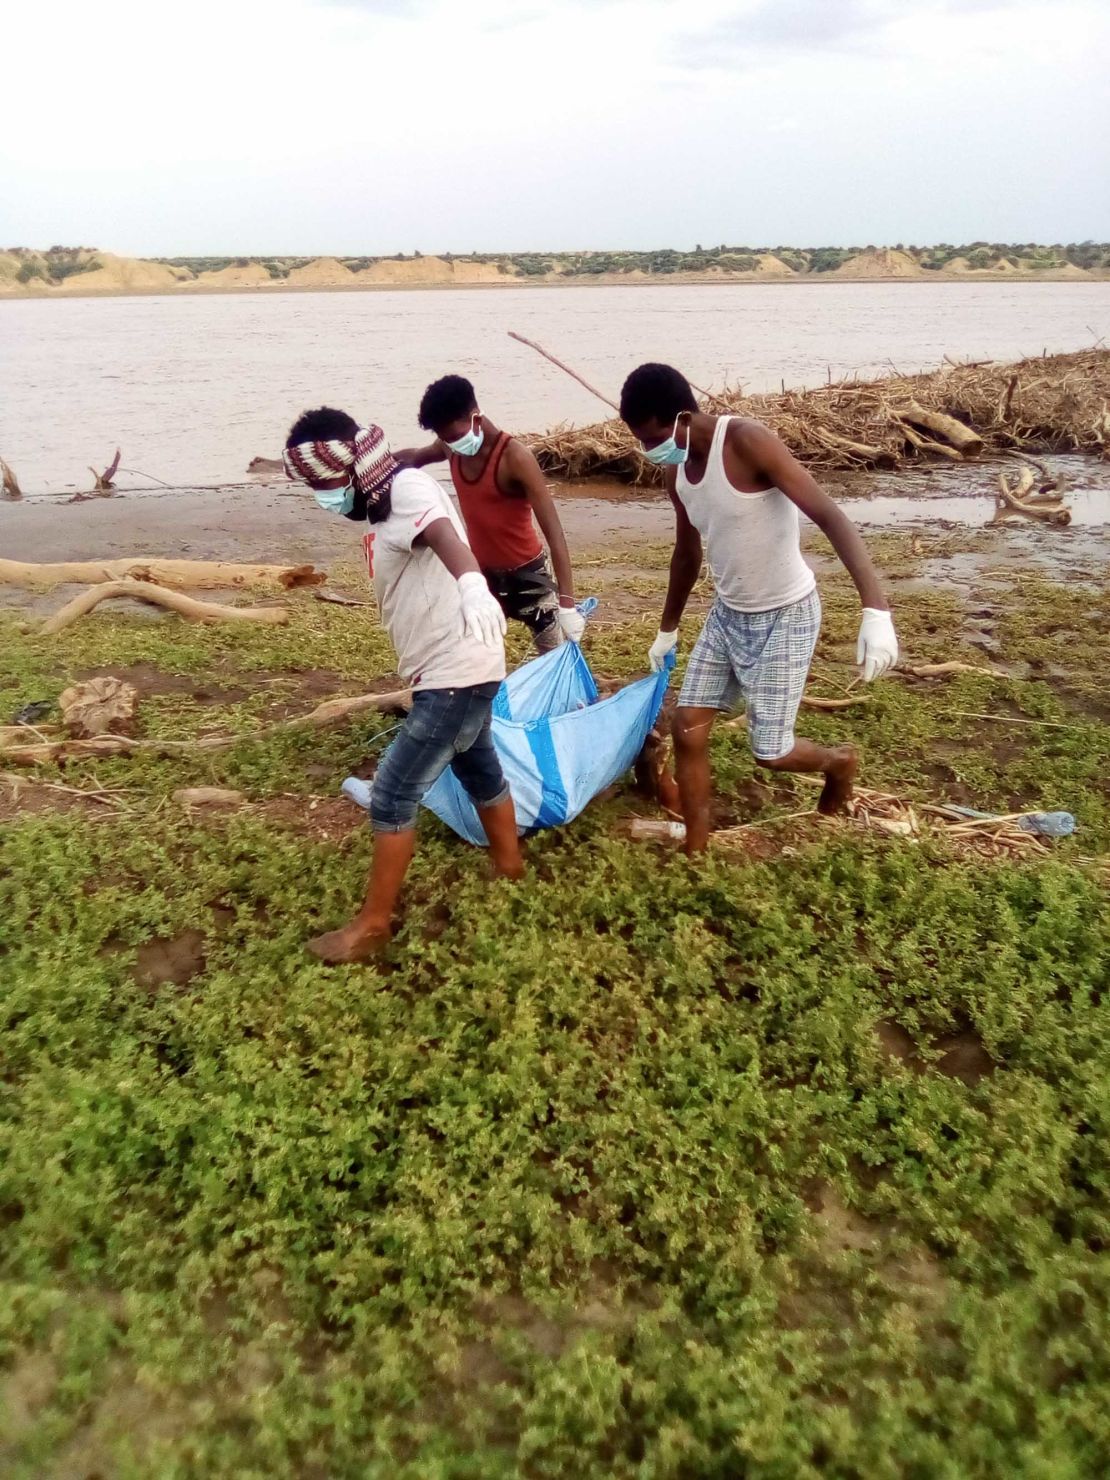 A body recovered from the Setit River bank by Wad El Hilou, Sudan, is carried on plastic sheeting.